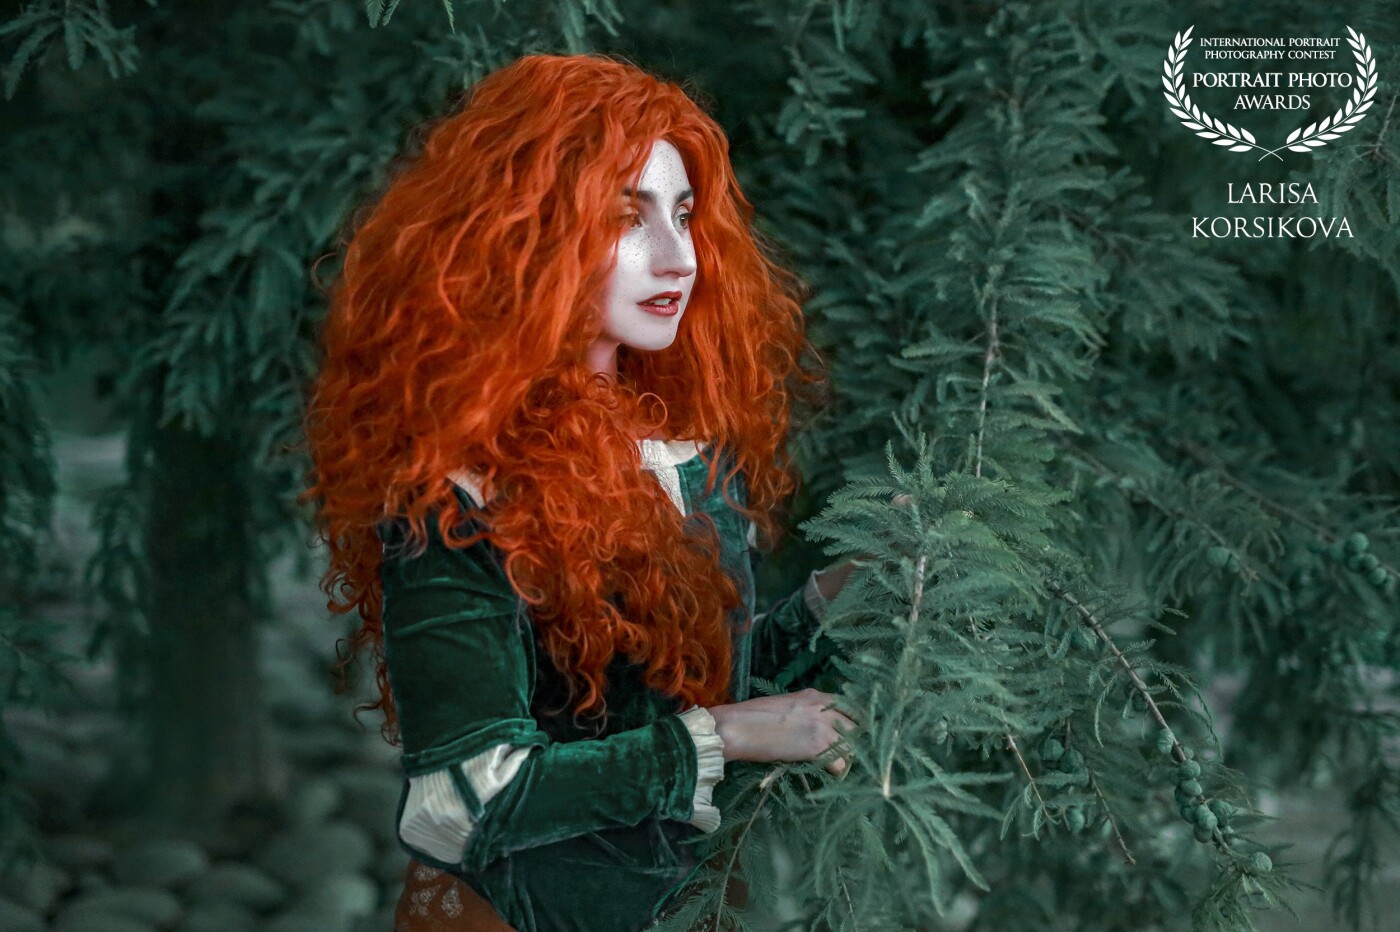 This is one of the pictures of my Workshop Cosplay. Cristina is the perfect model and actress, she plays Merida from the movie "Brave". 